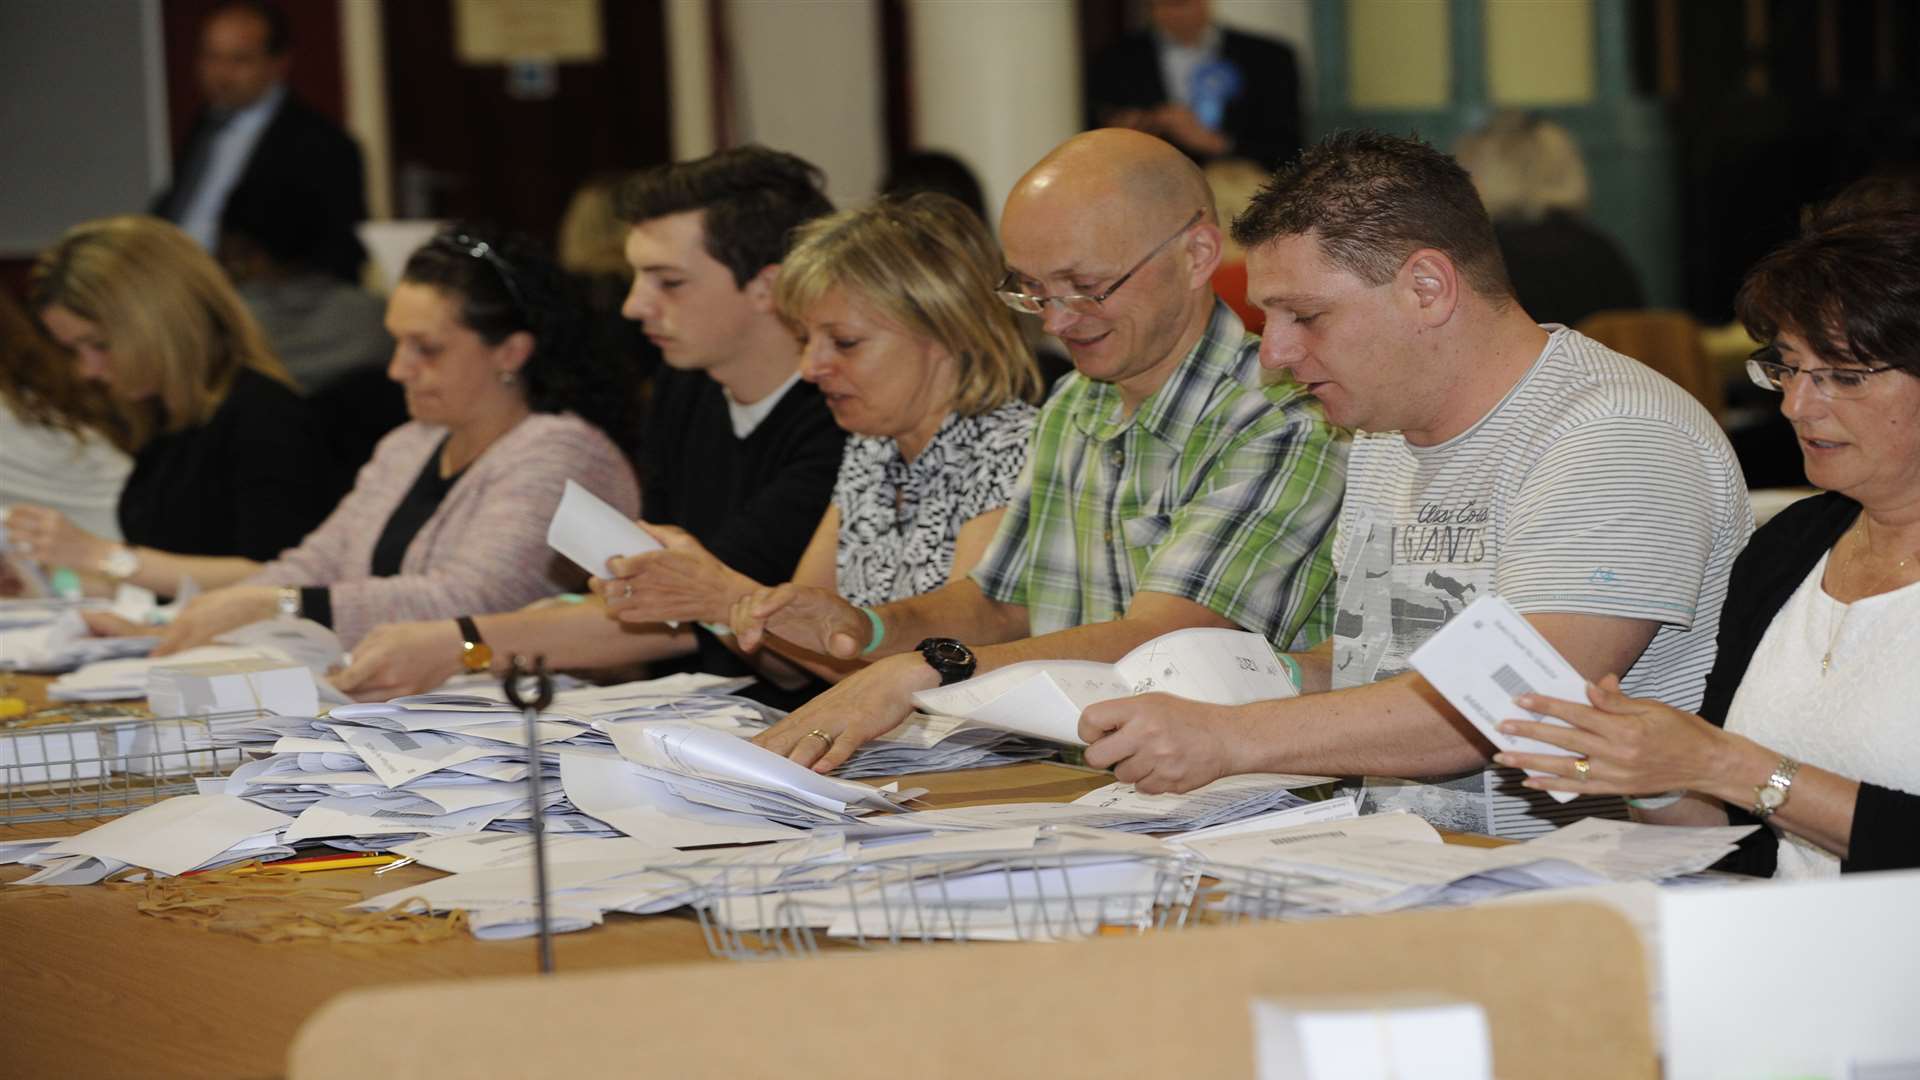 The first boxes of voting slips arrive at the Thanet count